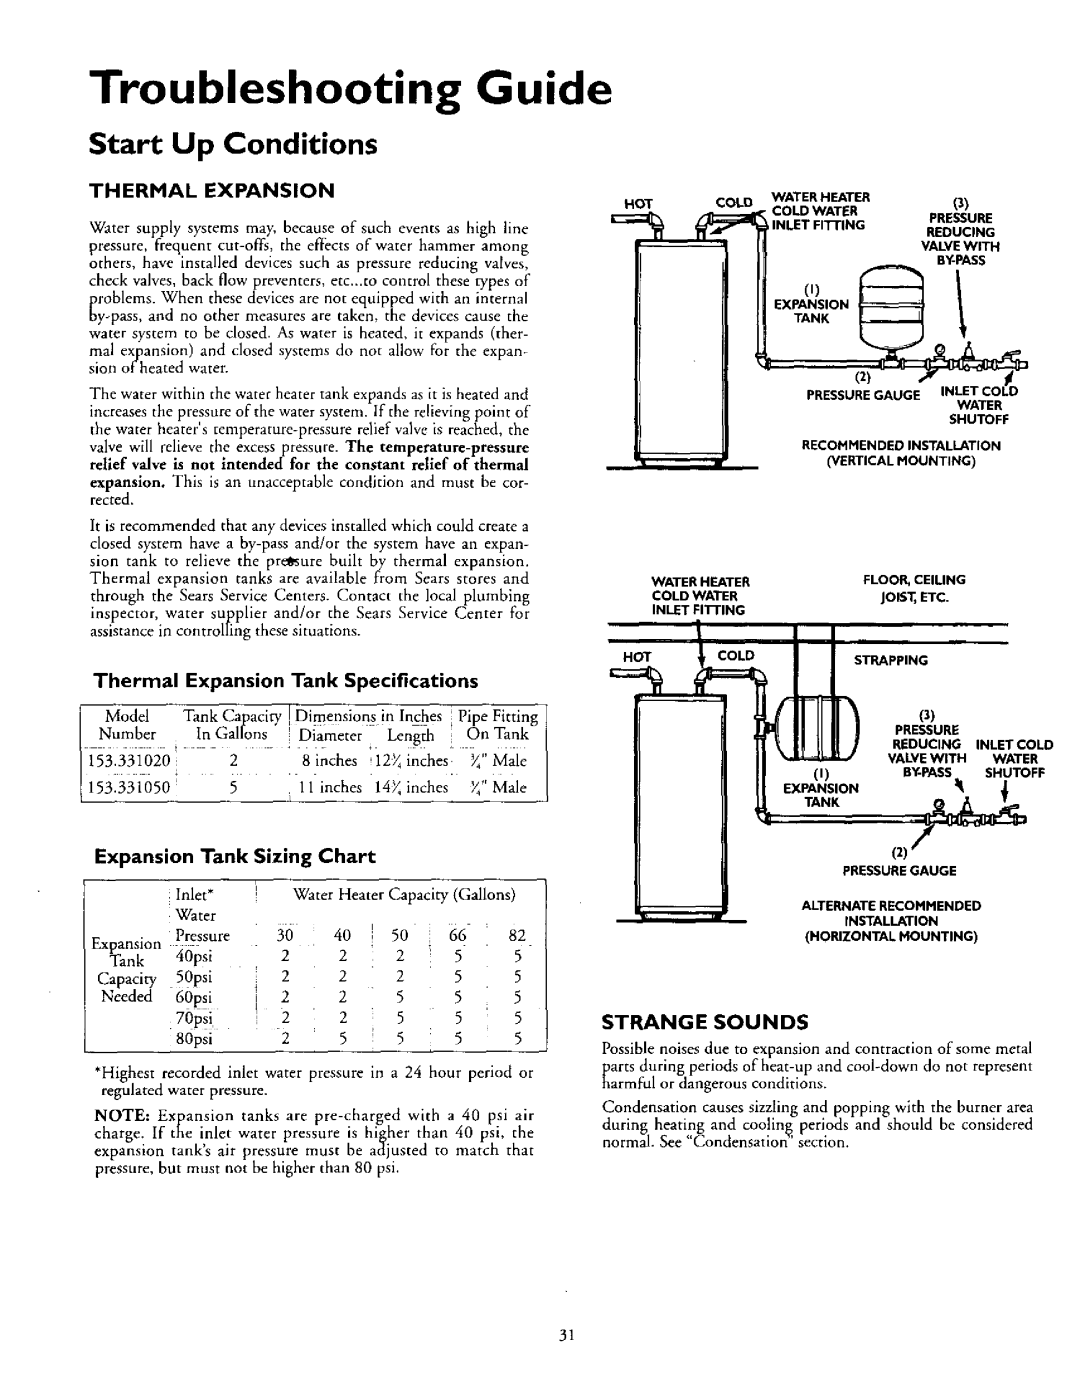 Kenmore 153.335963 Troubleshooting Guide, Start Up Conditions, Thermal, Expansion, Tank Specifications, Gallons 